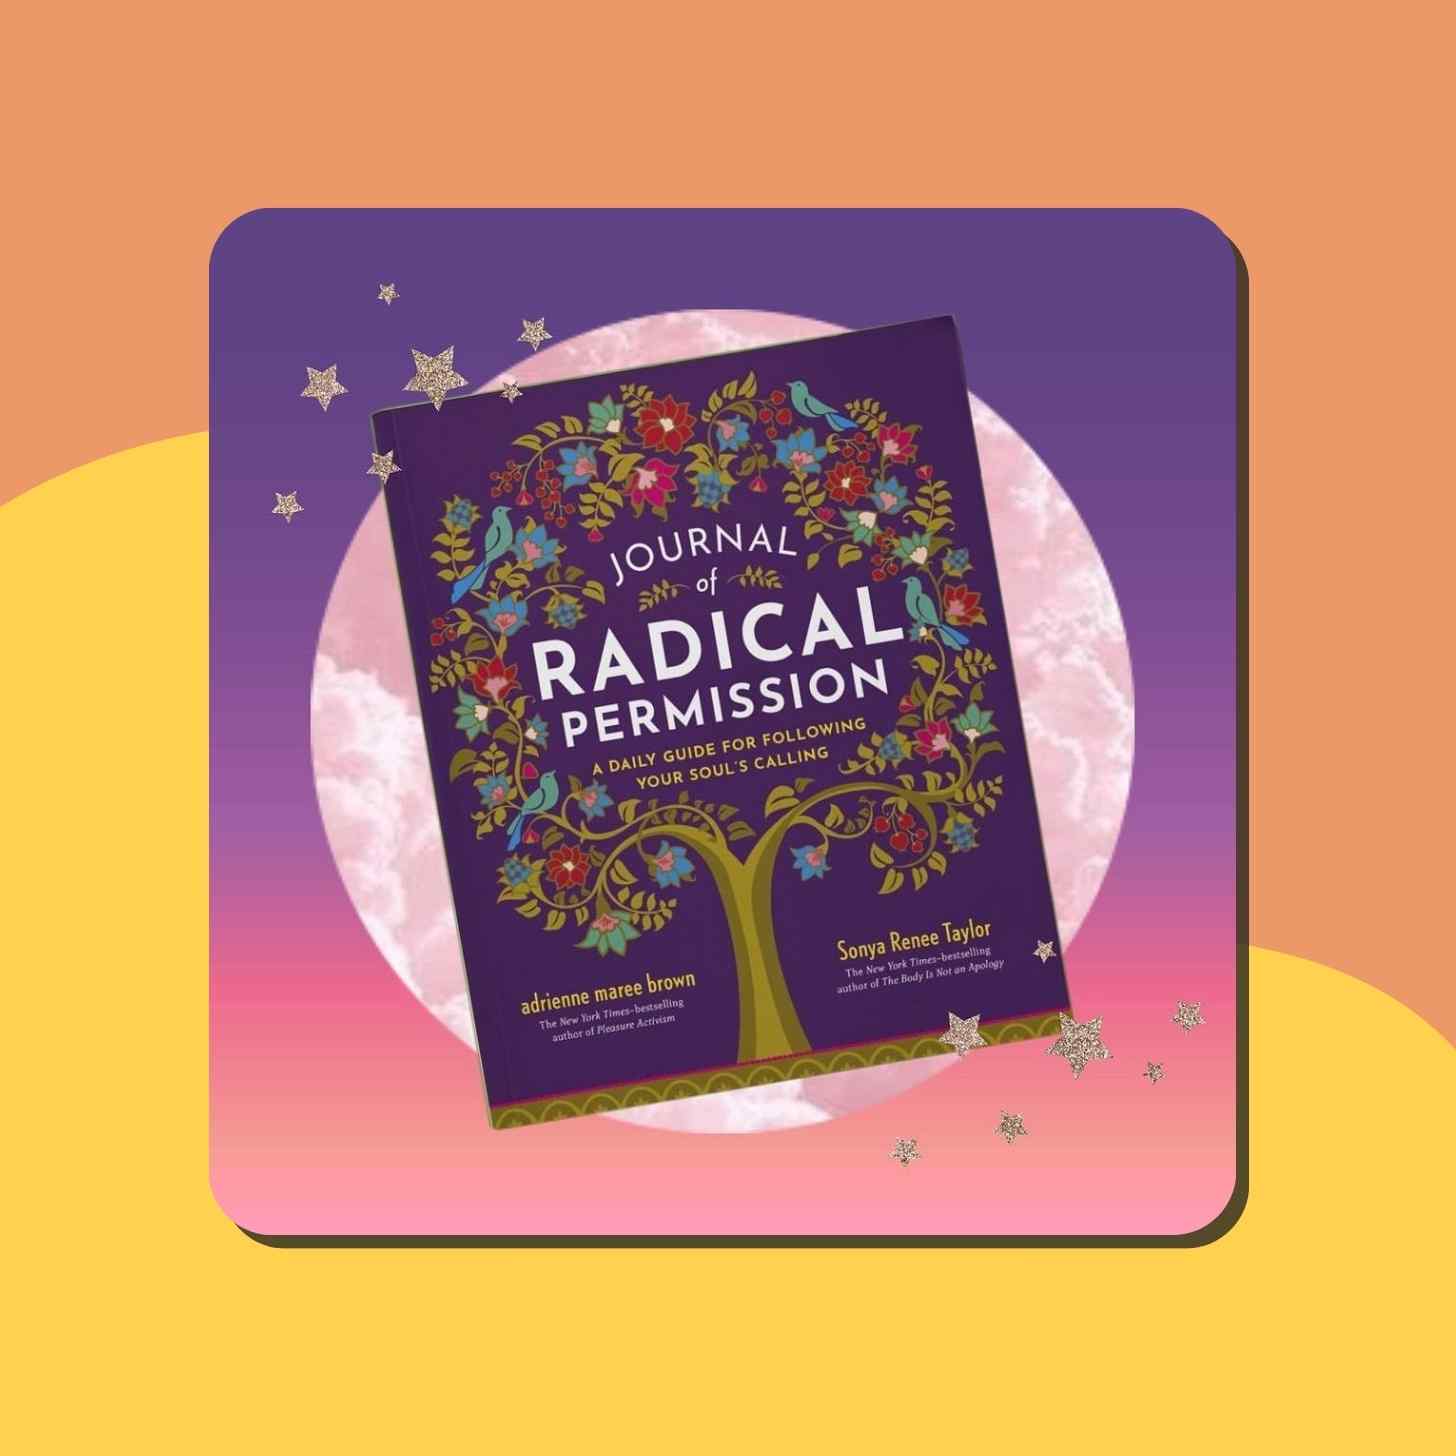 The Journal of "Radical Permission". A Daily Guide For Following Your Soul's Calling ByAdrienne Maree Brown And Sonya Renee Taylor